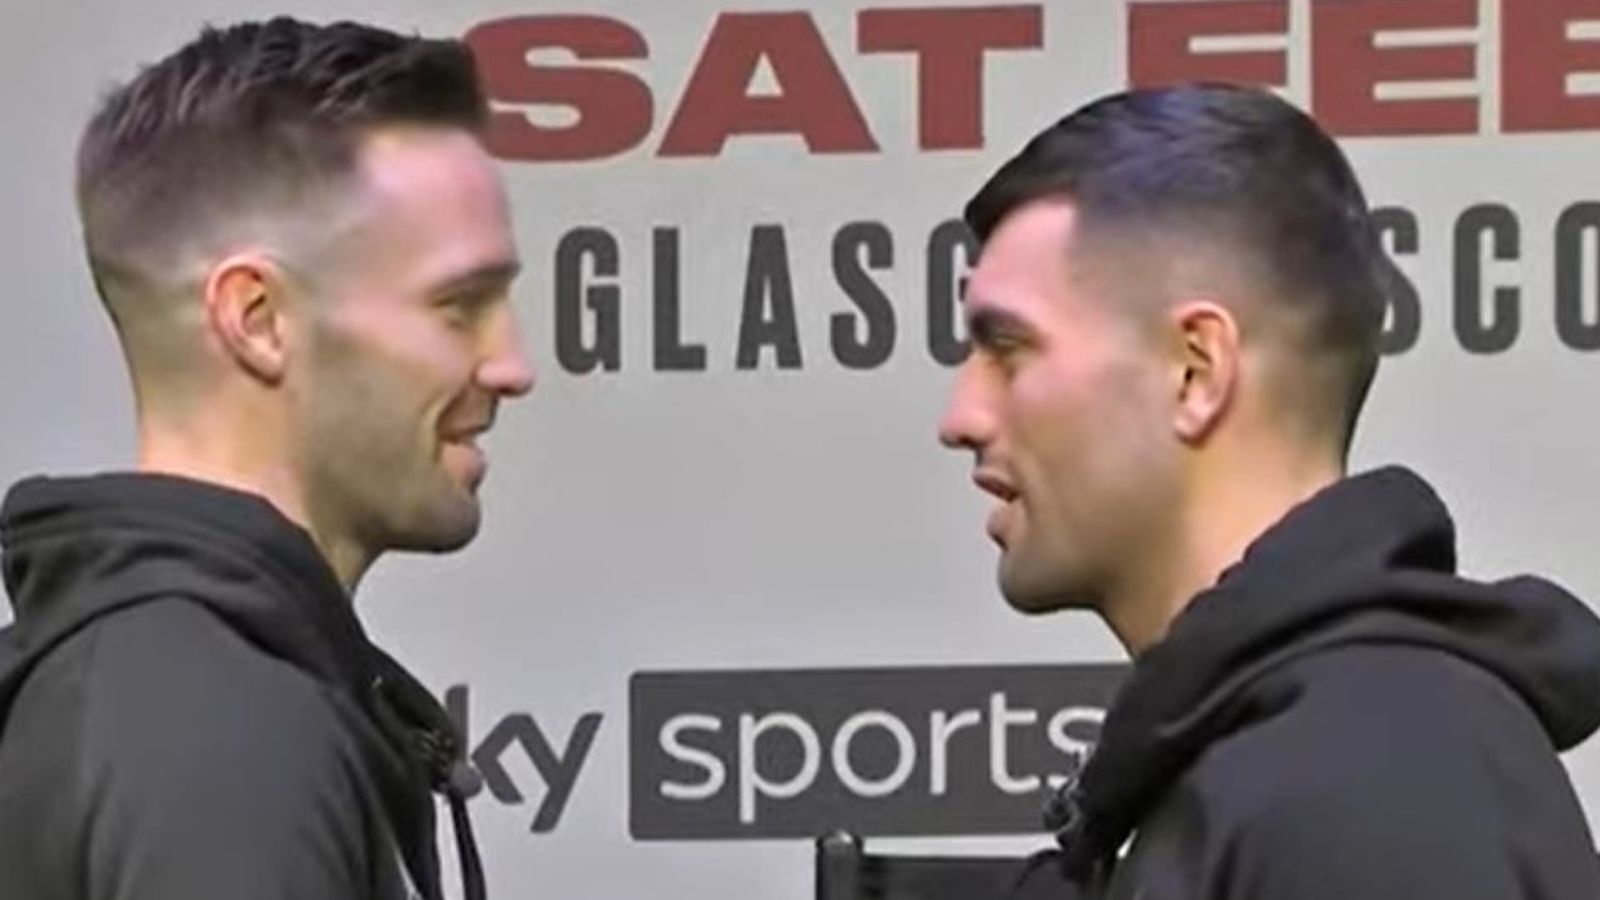 Josh Taylor vs Jack Catterall rematch: I created British boxing history, then complacency crept in, says Taylor